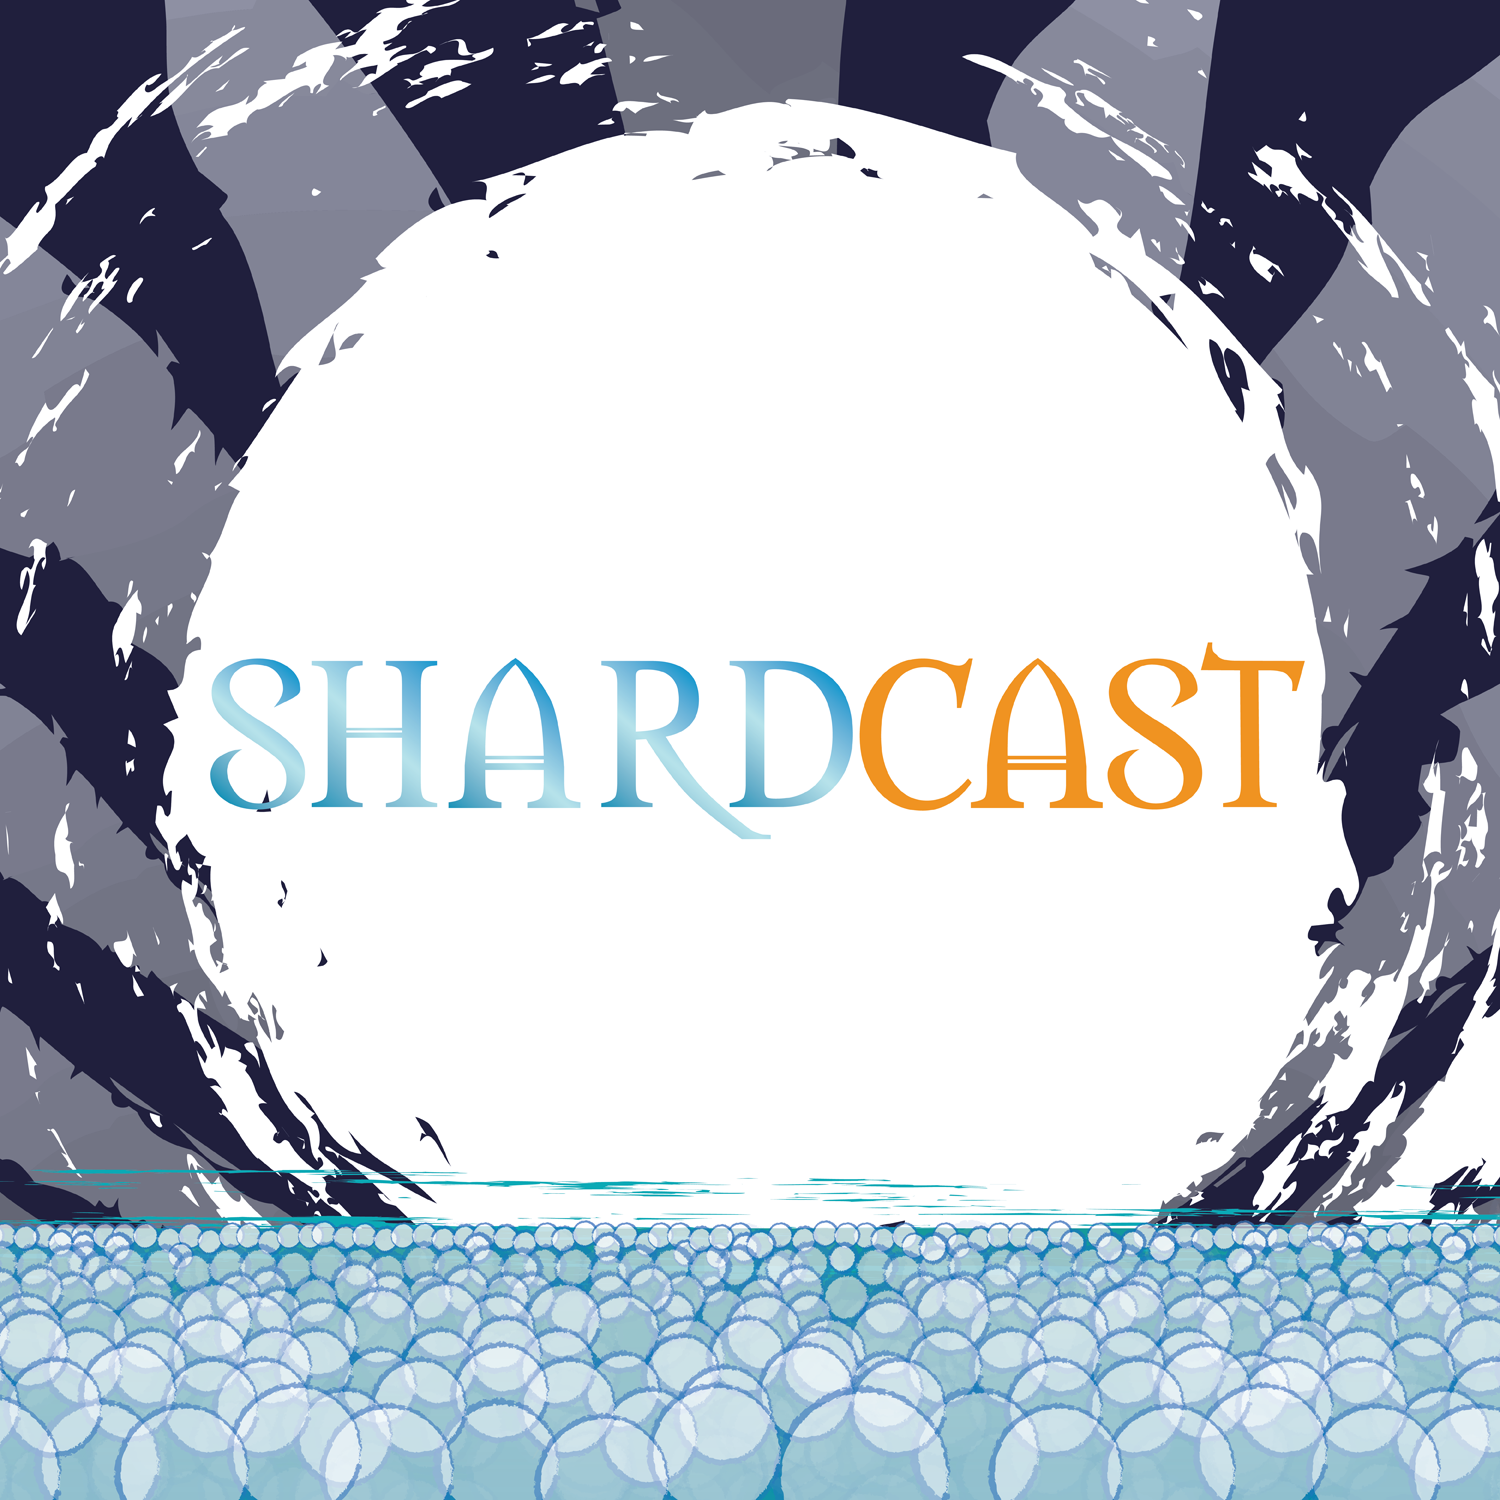 More information about "Shardcast: Stormlight 5 Prologue Reactions!"